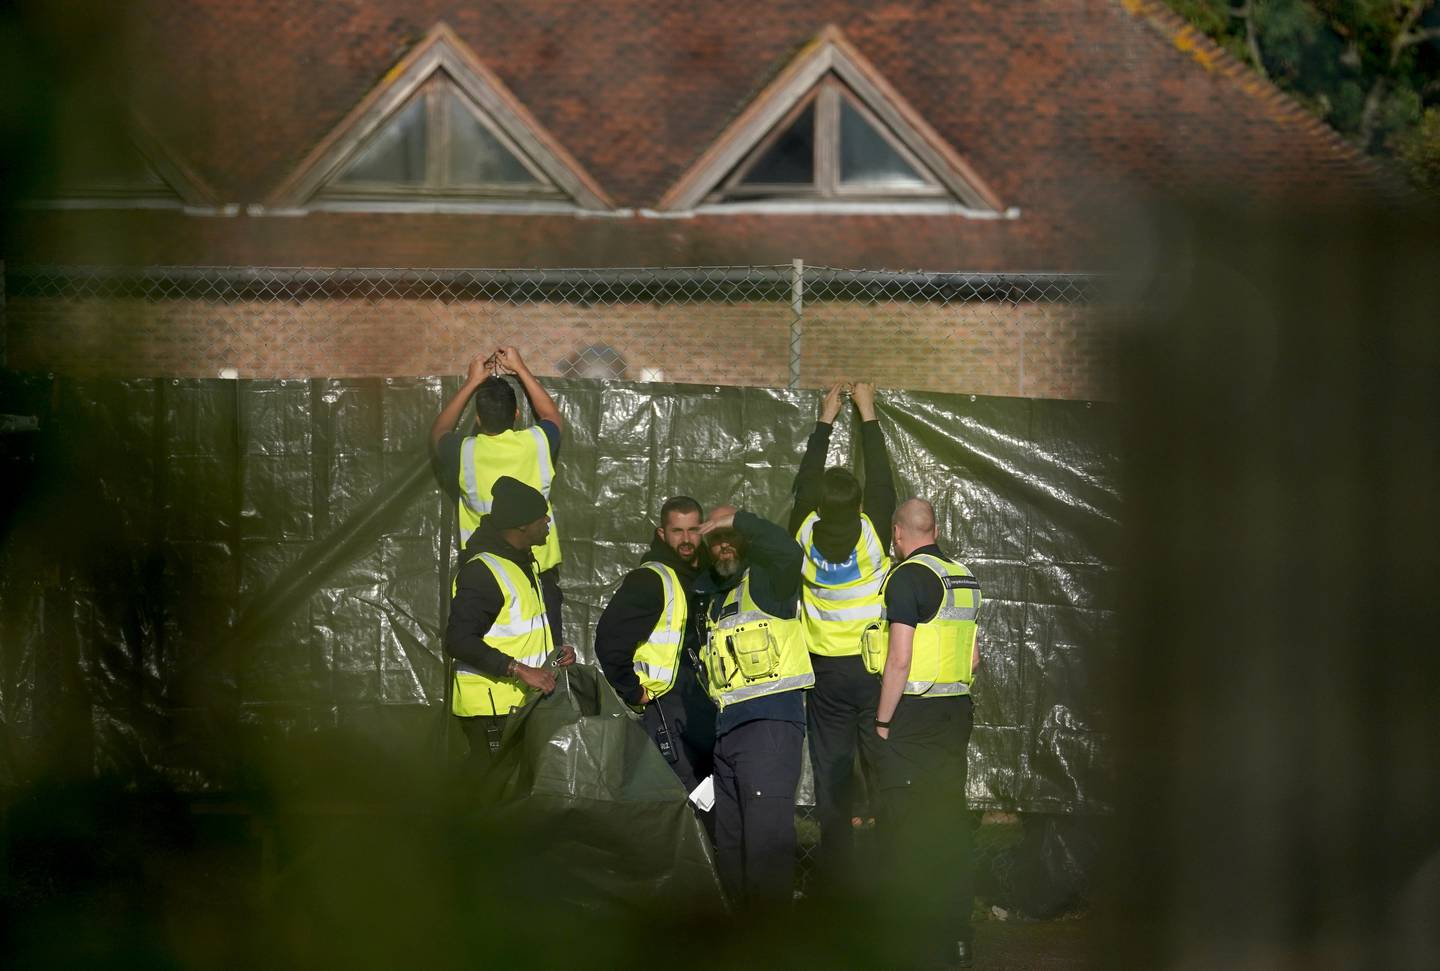 Security staff work to cover the view of people thought to be migrants at the Manston immigration short-term holding facility. PA 